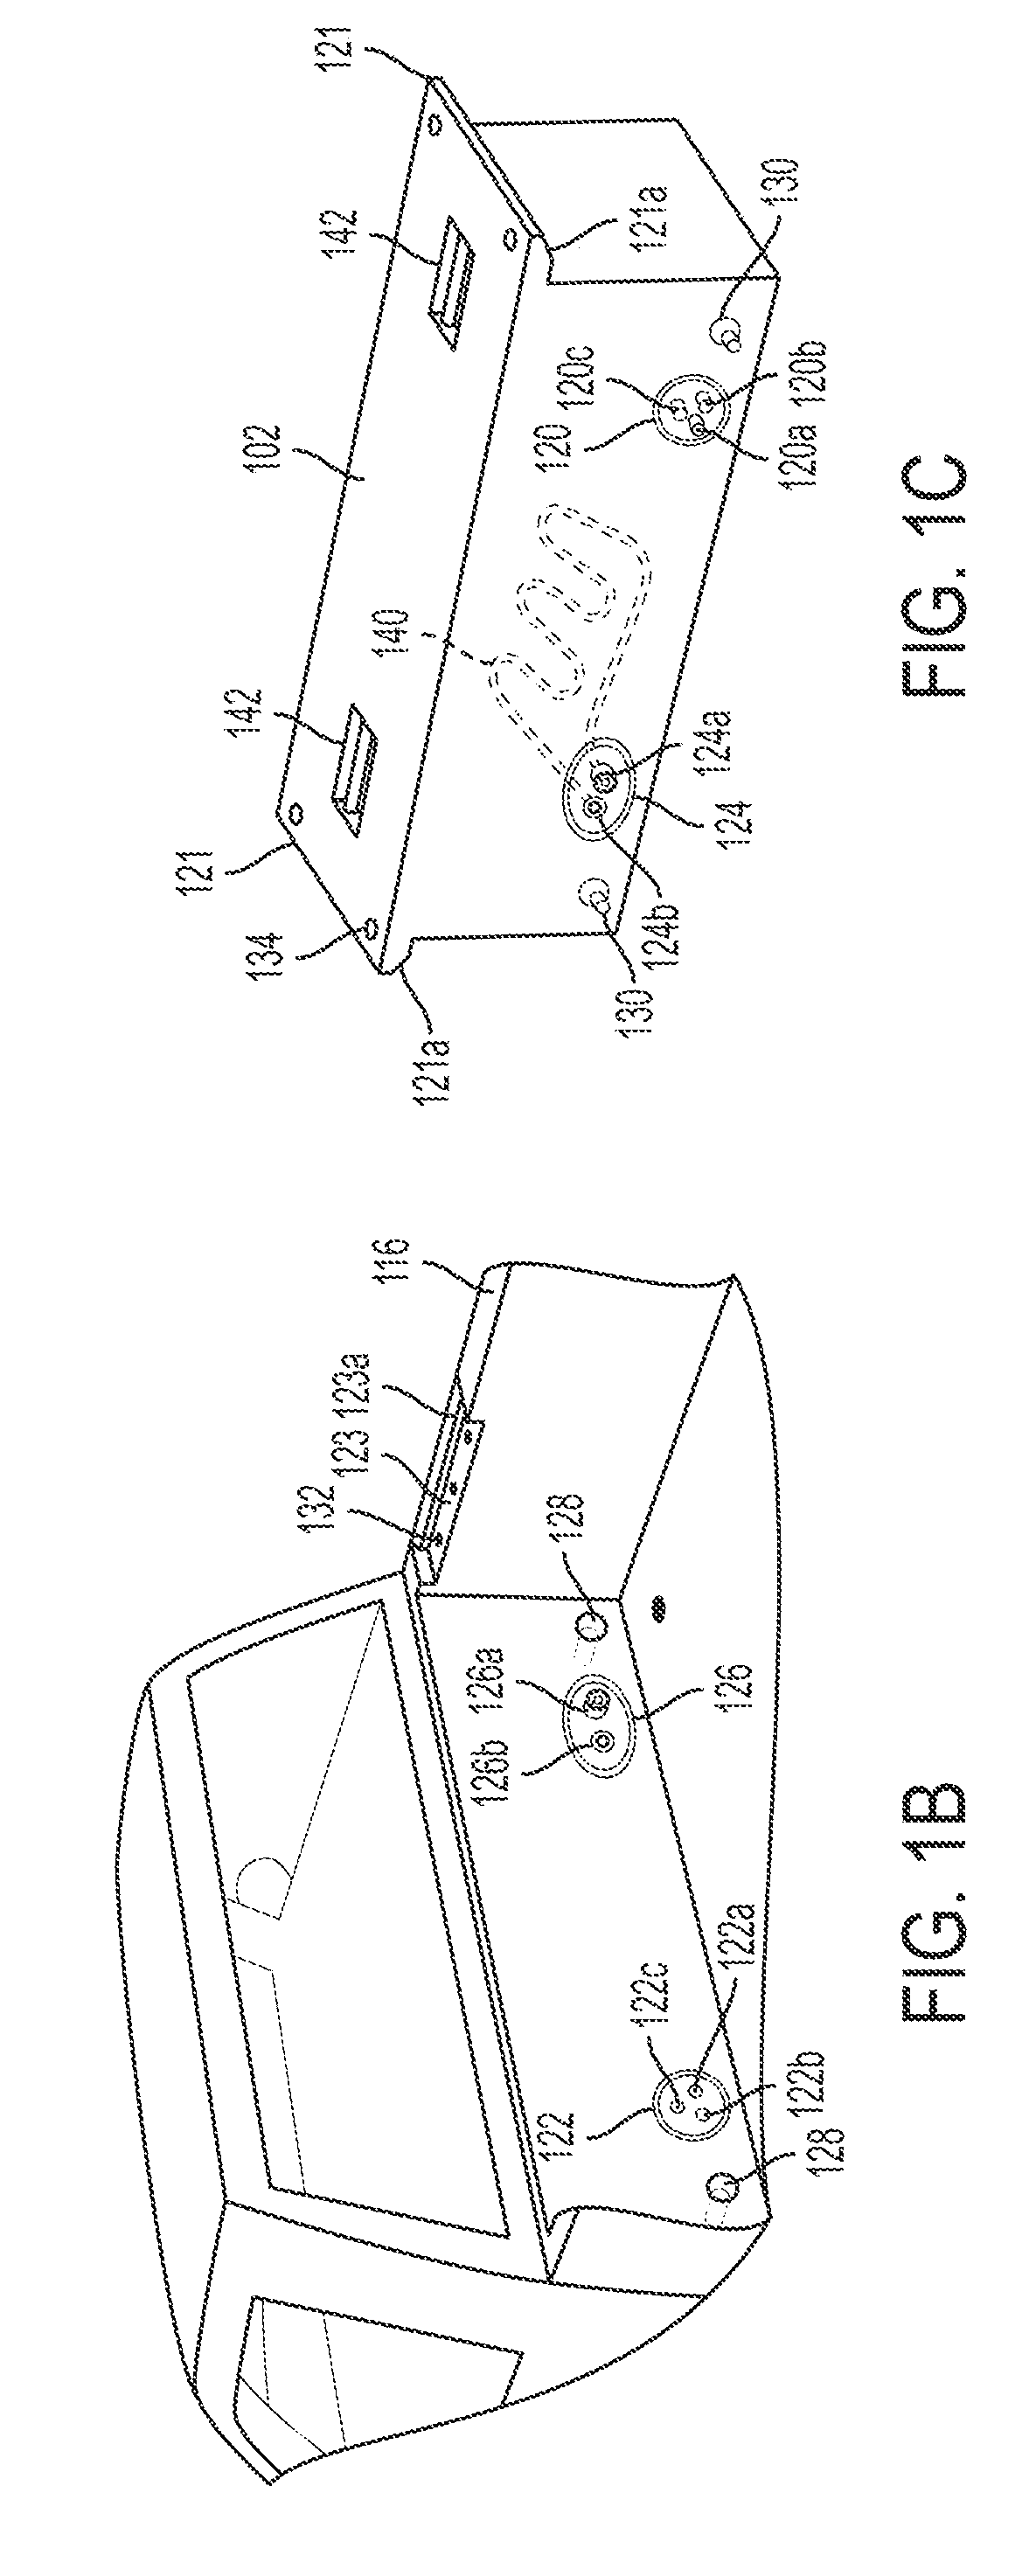 Electric Vehicle With Modular Removable Auxiliary Battery With Integrated Cooling